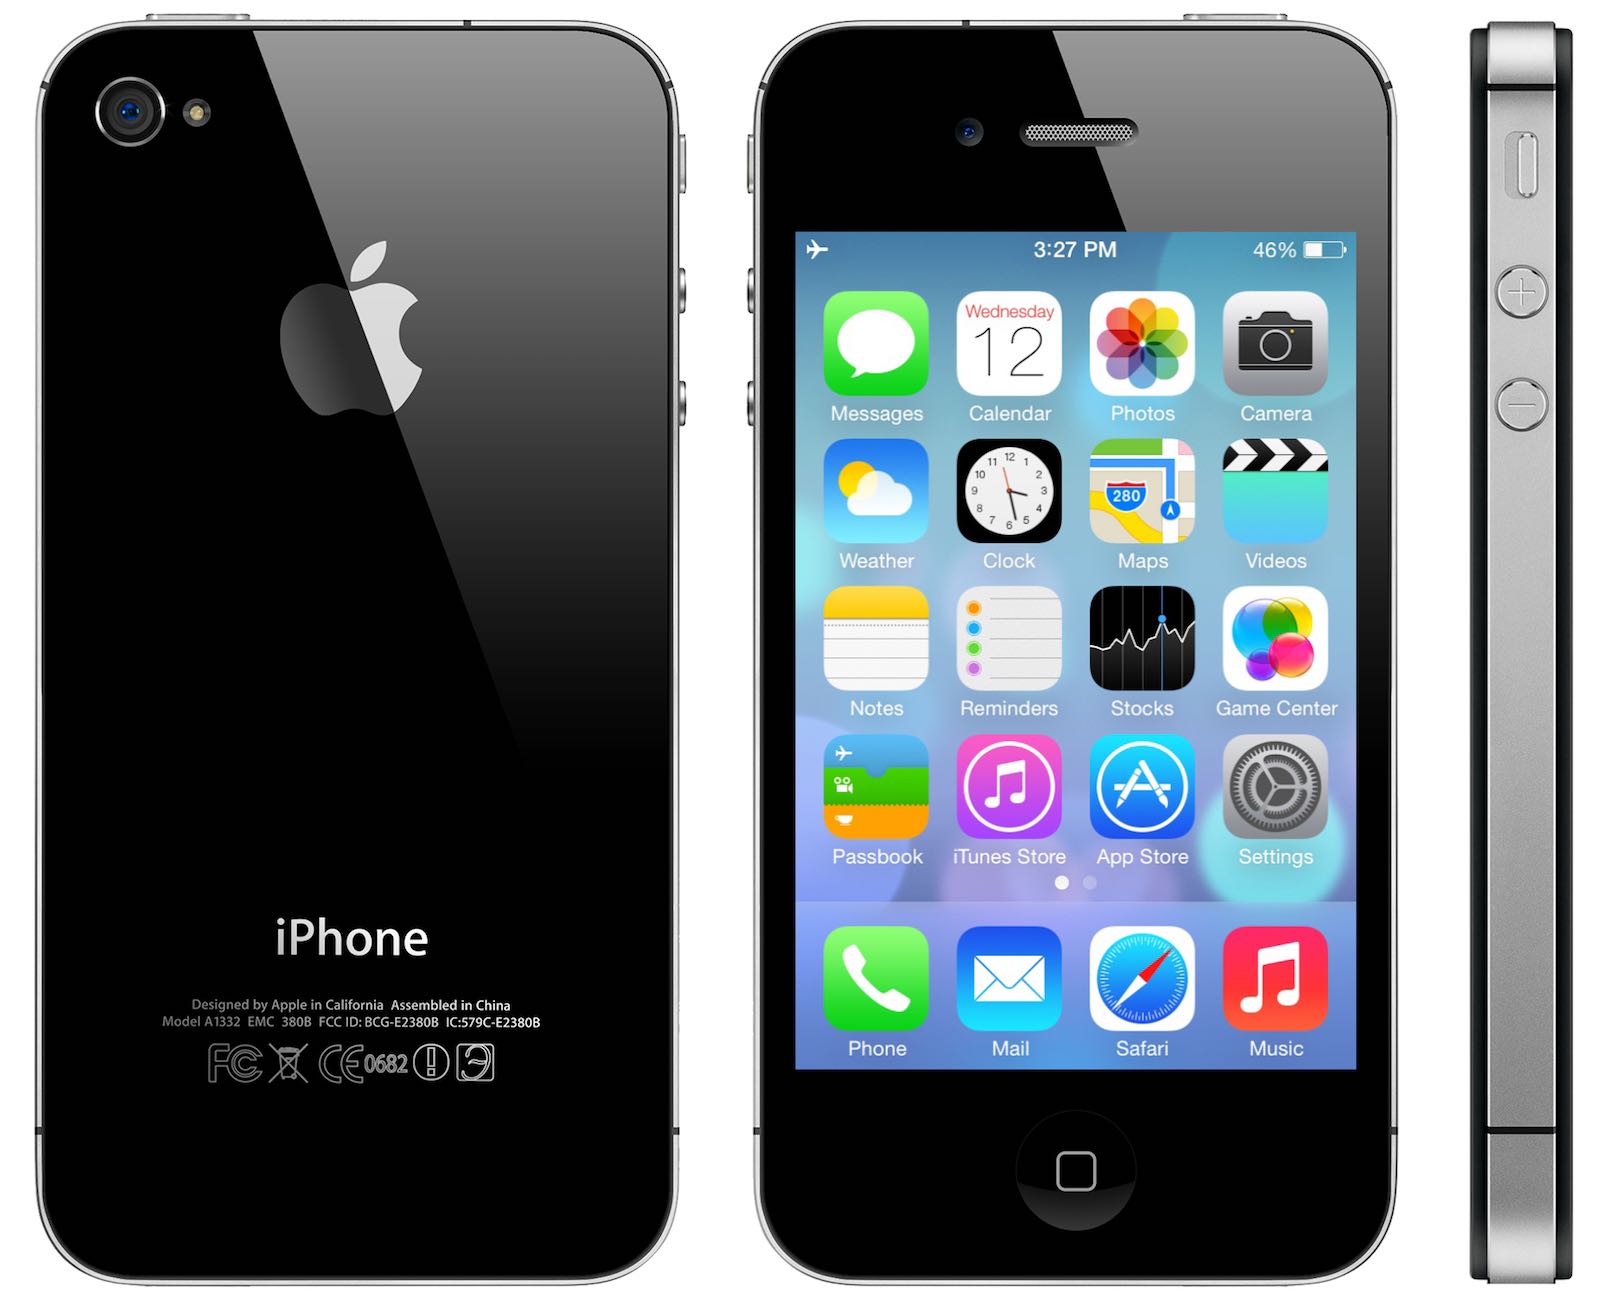 Iphone a. Iphone 4s. Apple iphone 4s. Смартфон Apple iphone 4s 16gb. Apple iphone 4s (16gb) Black.